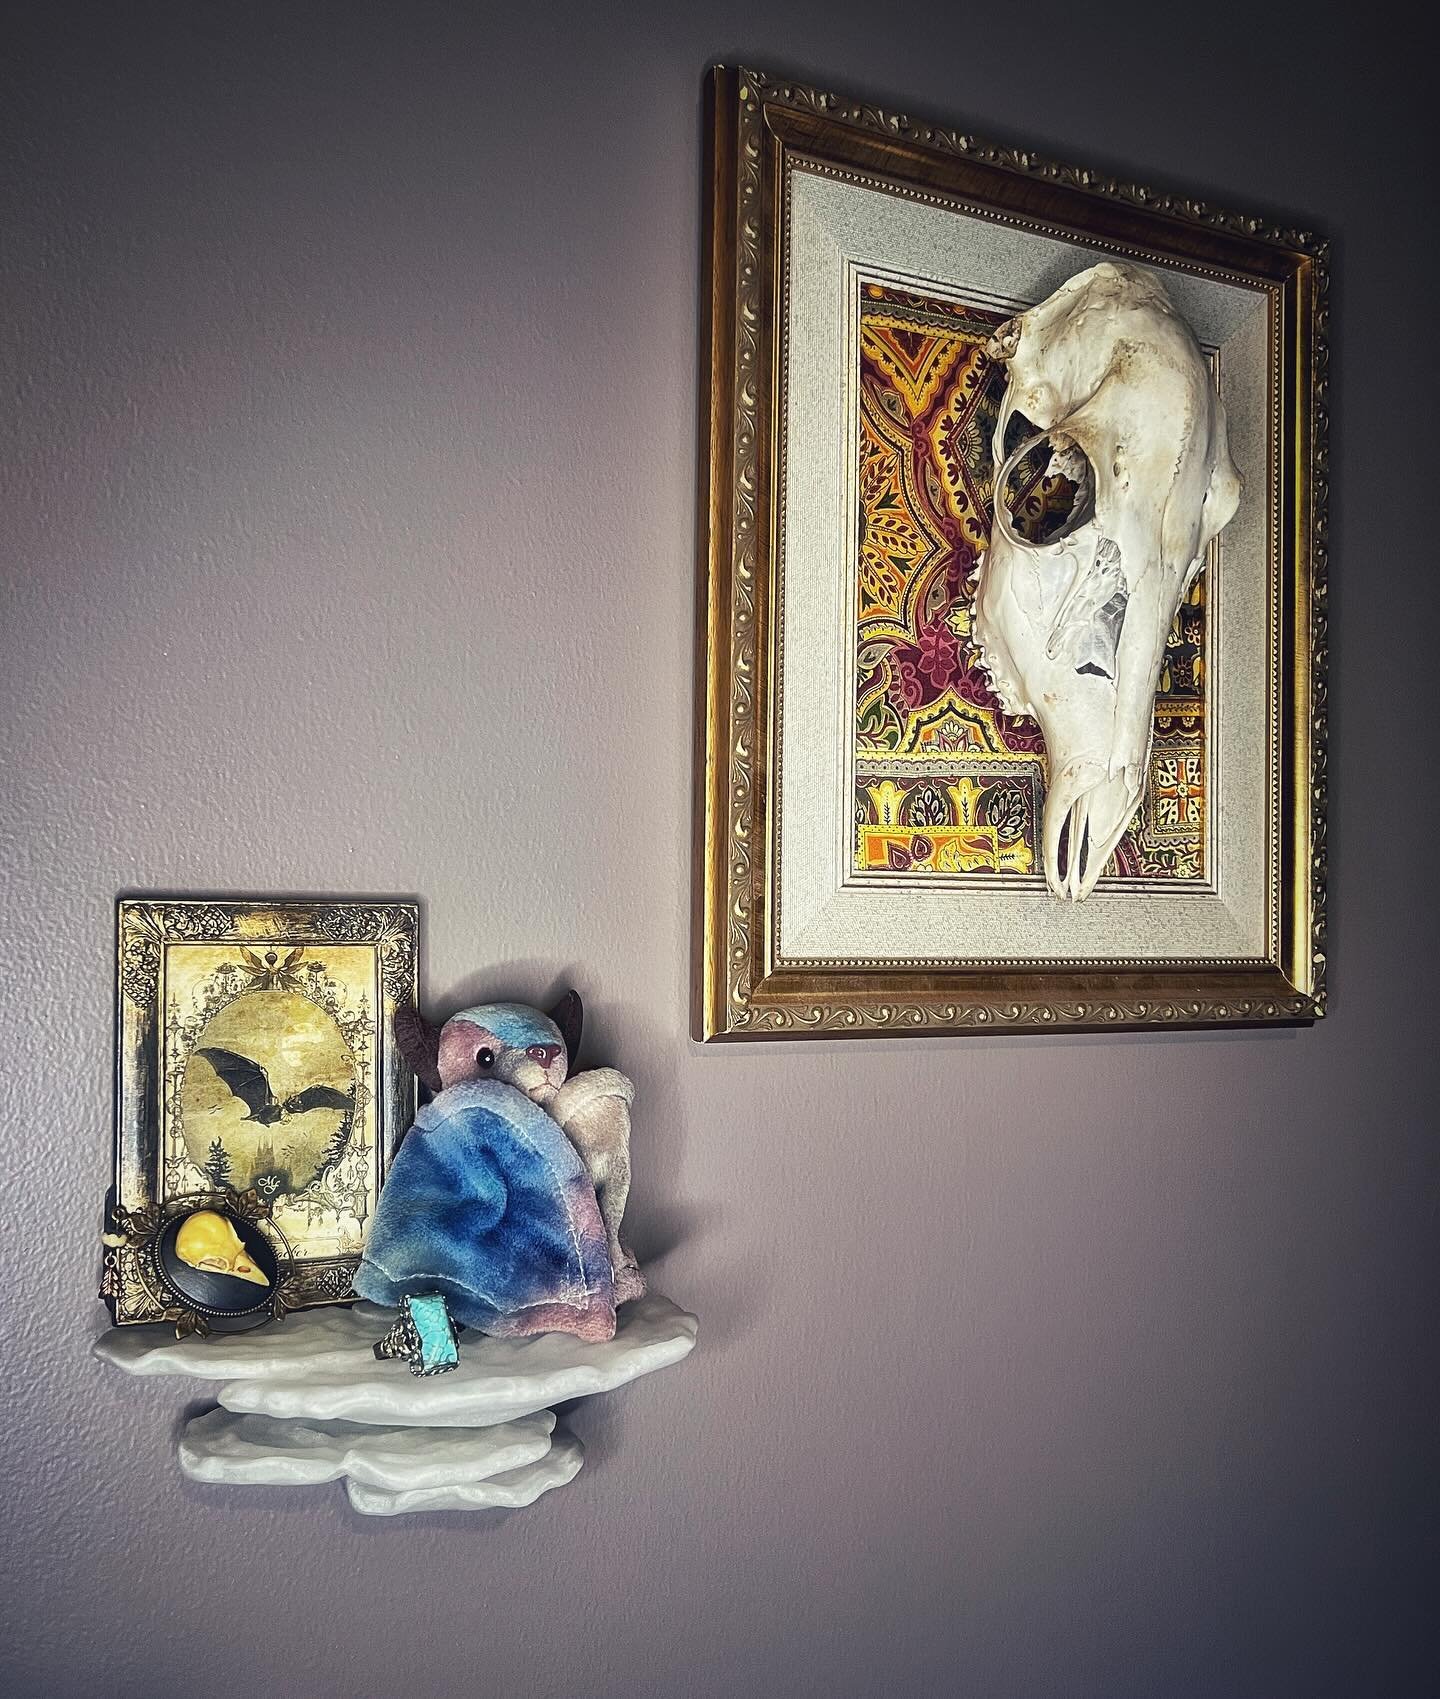 I finally got around to getting a mushroom shelf set up in my Victorian / goths inspired bedroom 🤩

Love how it looks in this style of decor too 🥰

I found the deer skull in the woods, the bat beanie baby I&rsquo;ve had since I was a teen 😅and the